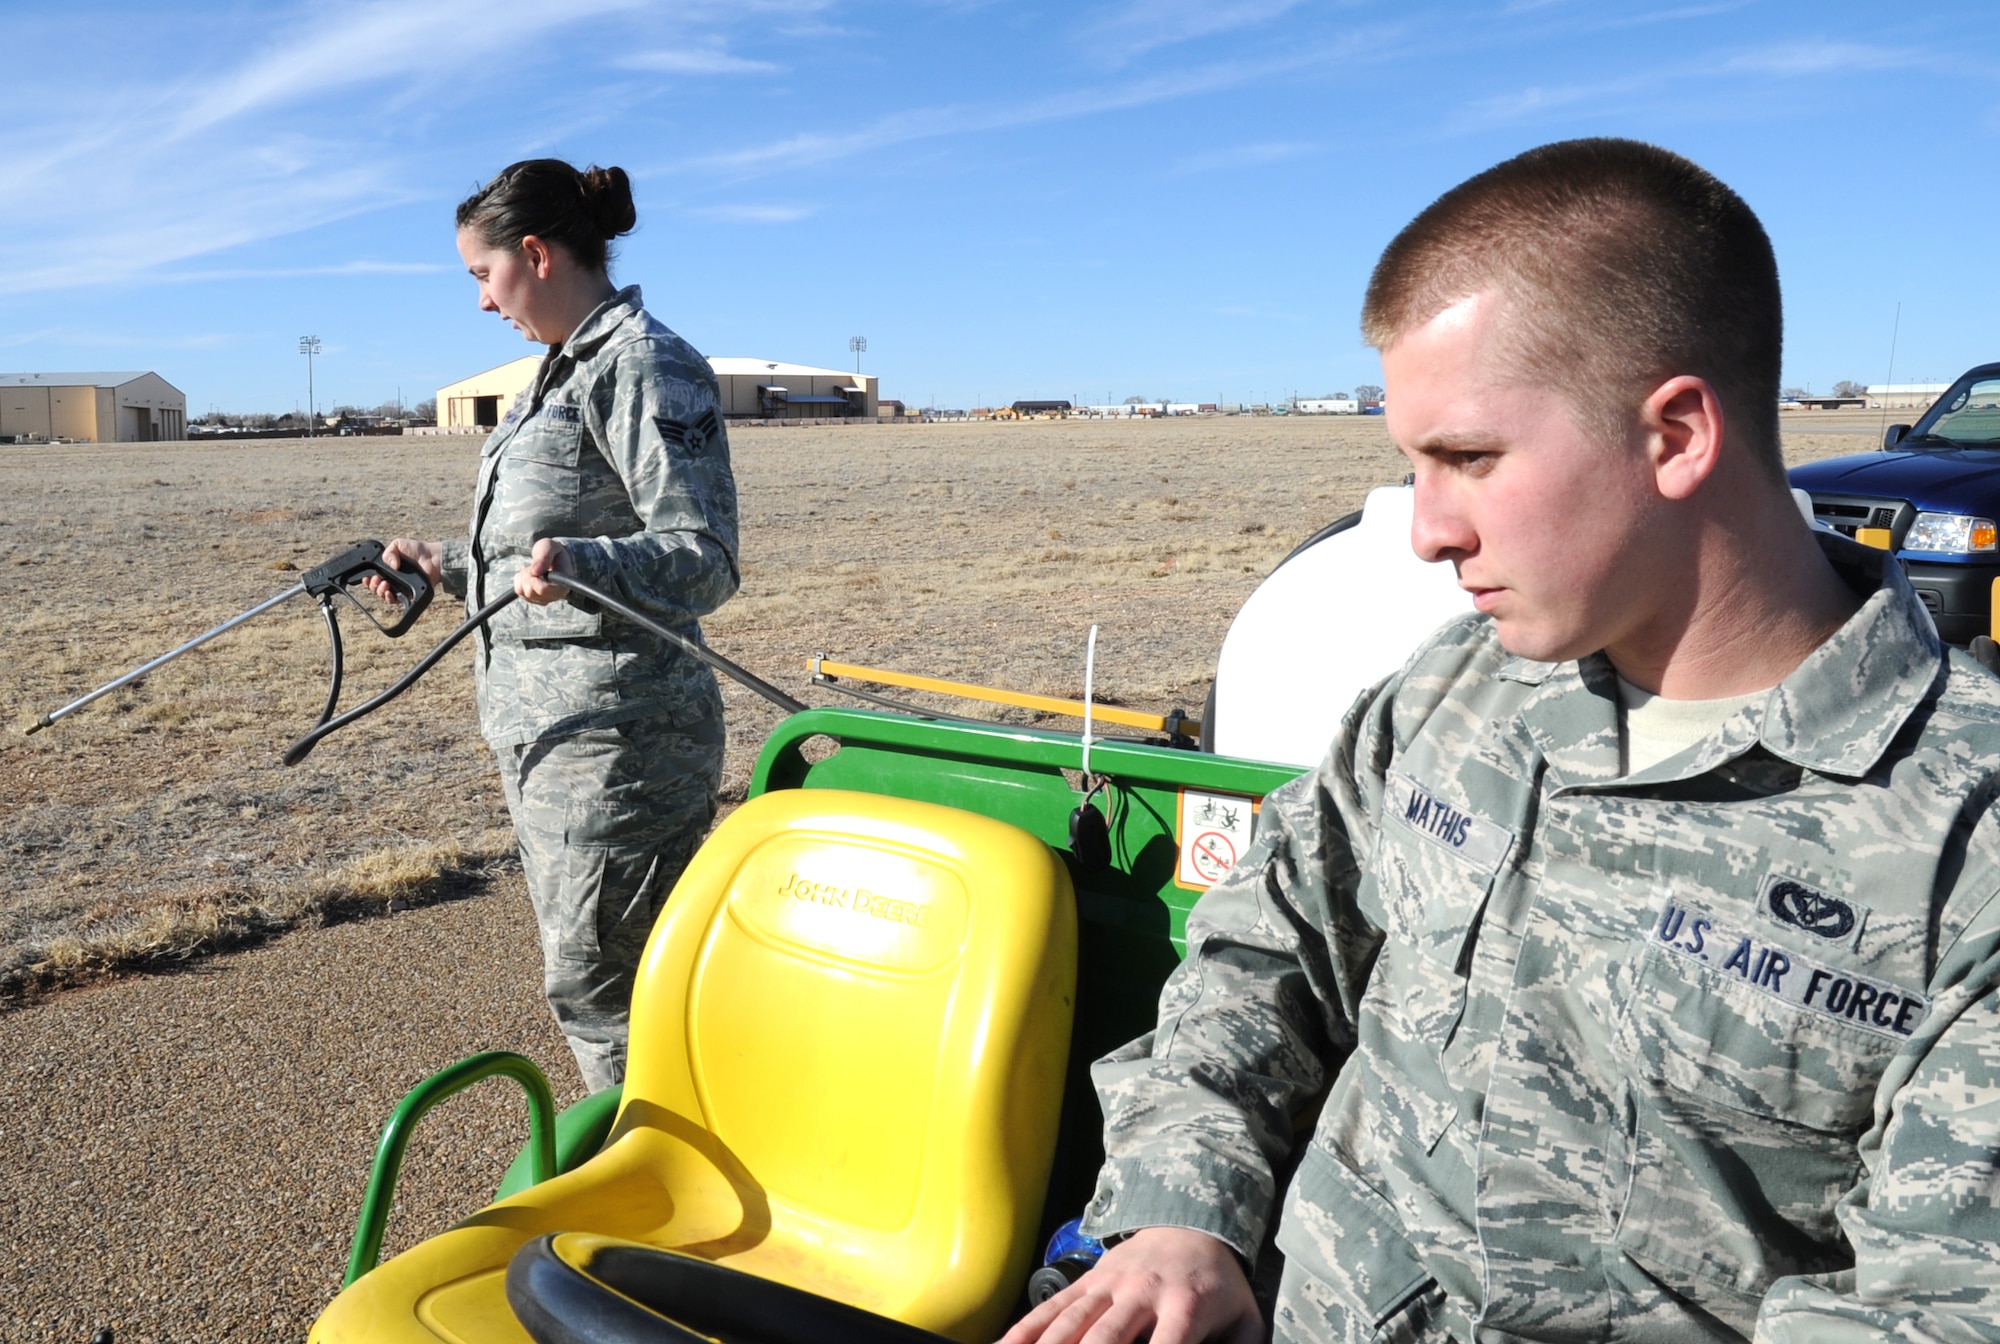 U.S. Air Force Senior Airman C?Belle Tennimon sprays weed killer while Airman 1st Class Jacob Mathis navigates their vehicle near the flightline at Cannon Air Force Base, N.M., Feb. 1, 2012. Both Air Commandos are pest managers who routinely deal with public health concerns at Cannon. (U.S. Air Force photo by Airman 1st Class Alexxis Pons Abascal)  